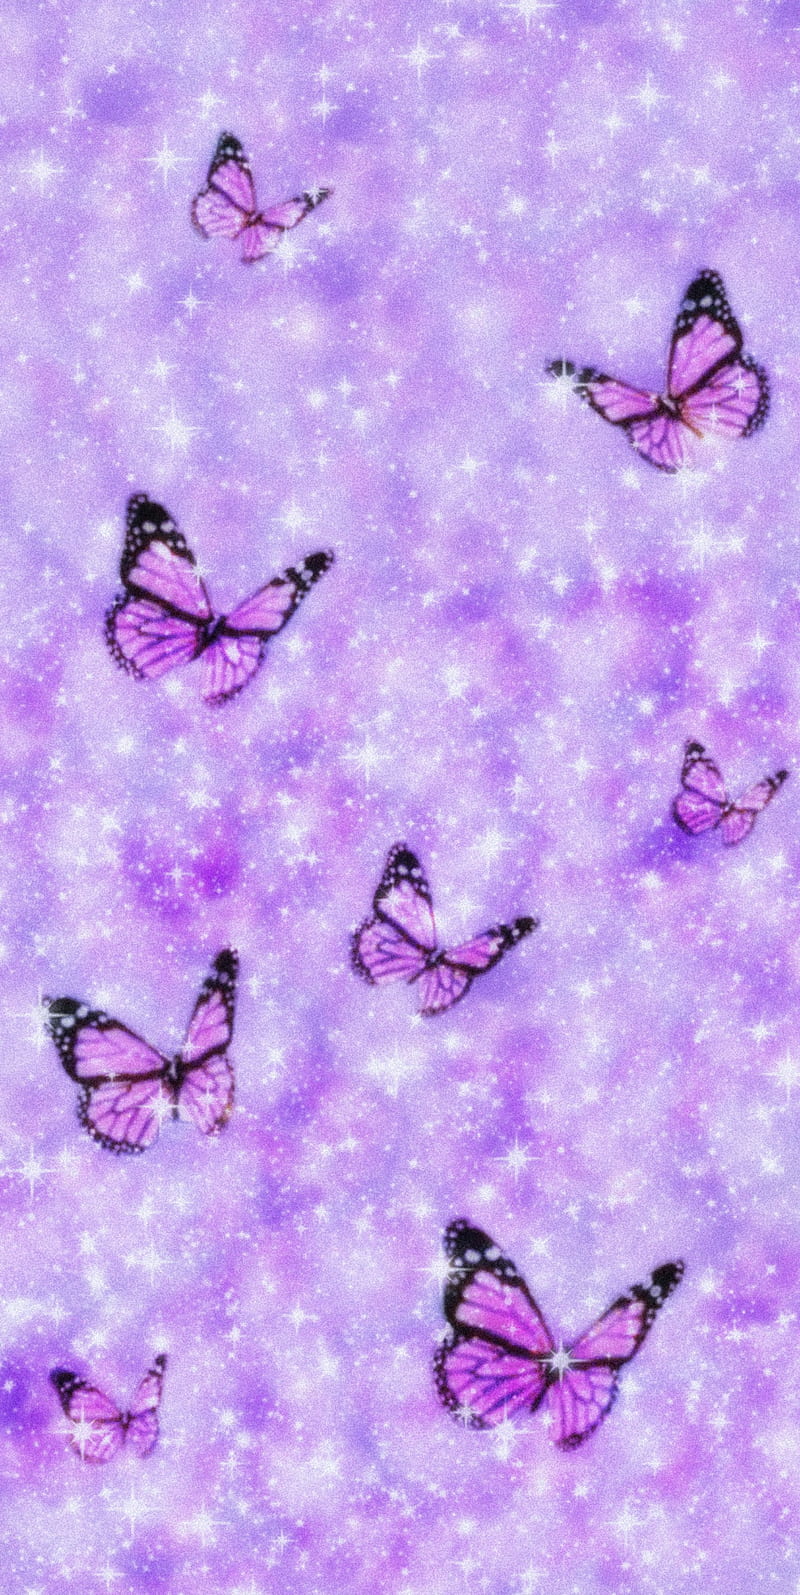 Wallpaper Blue and Purple Butterflies on White Background Background   Download Free Image